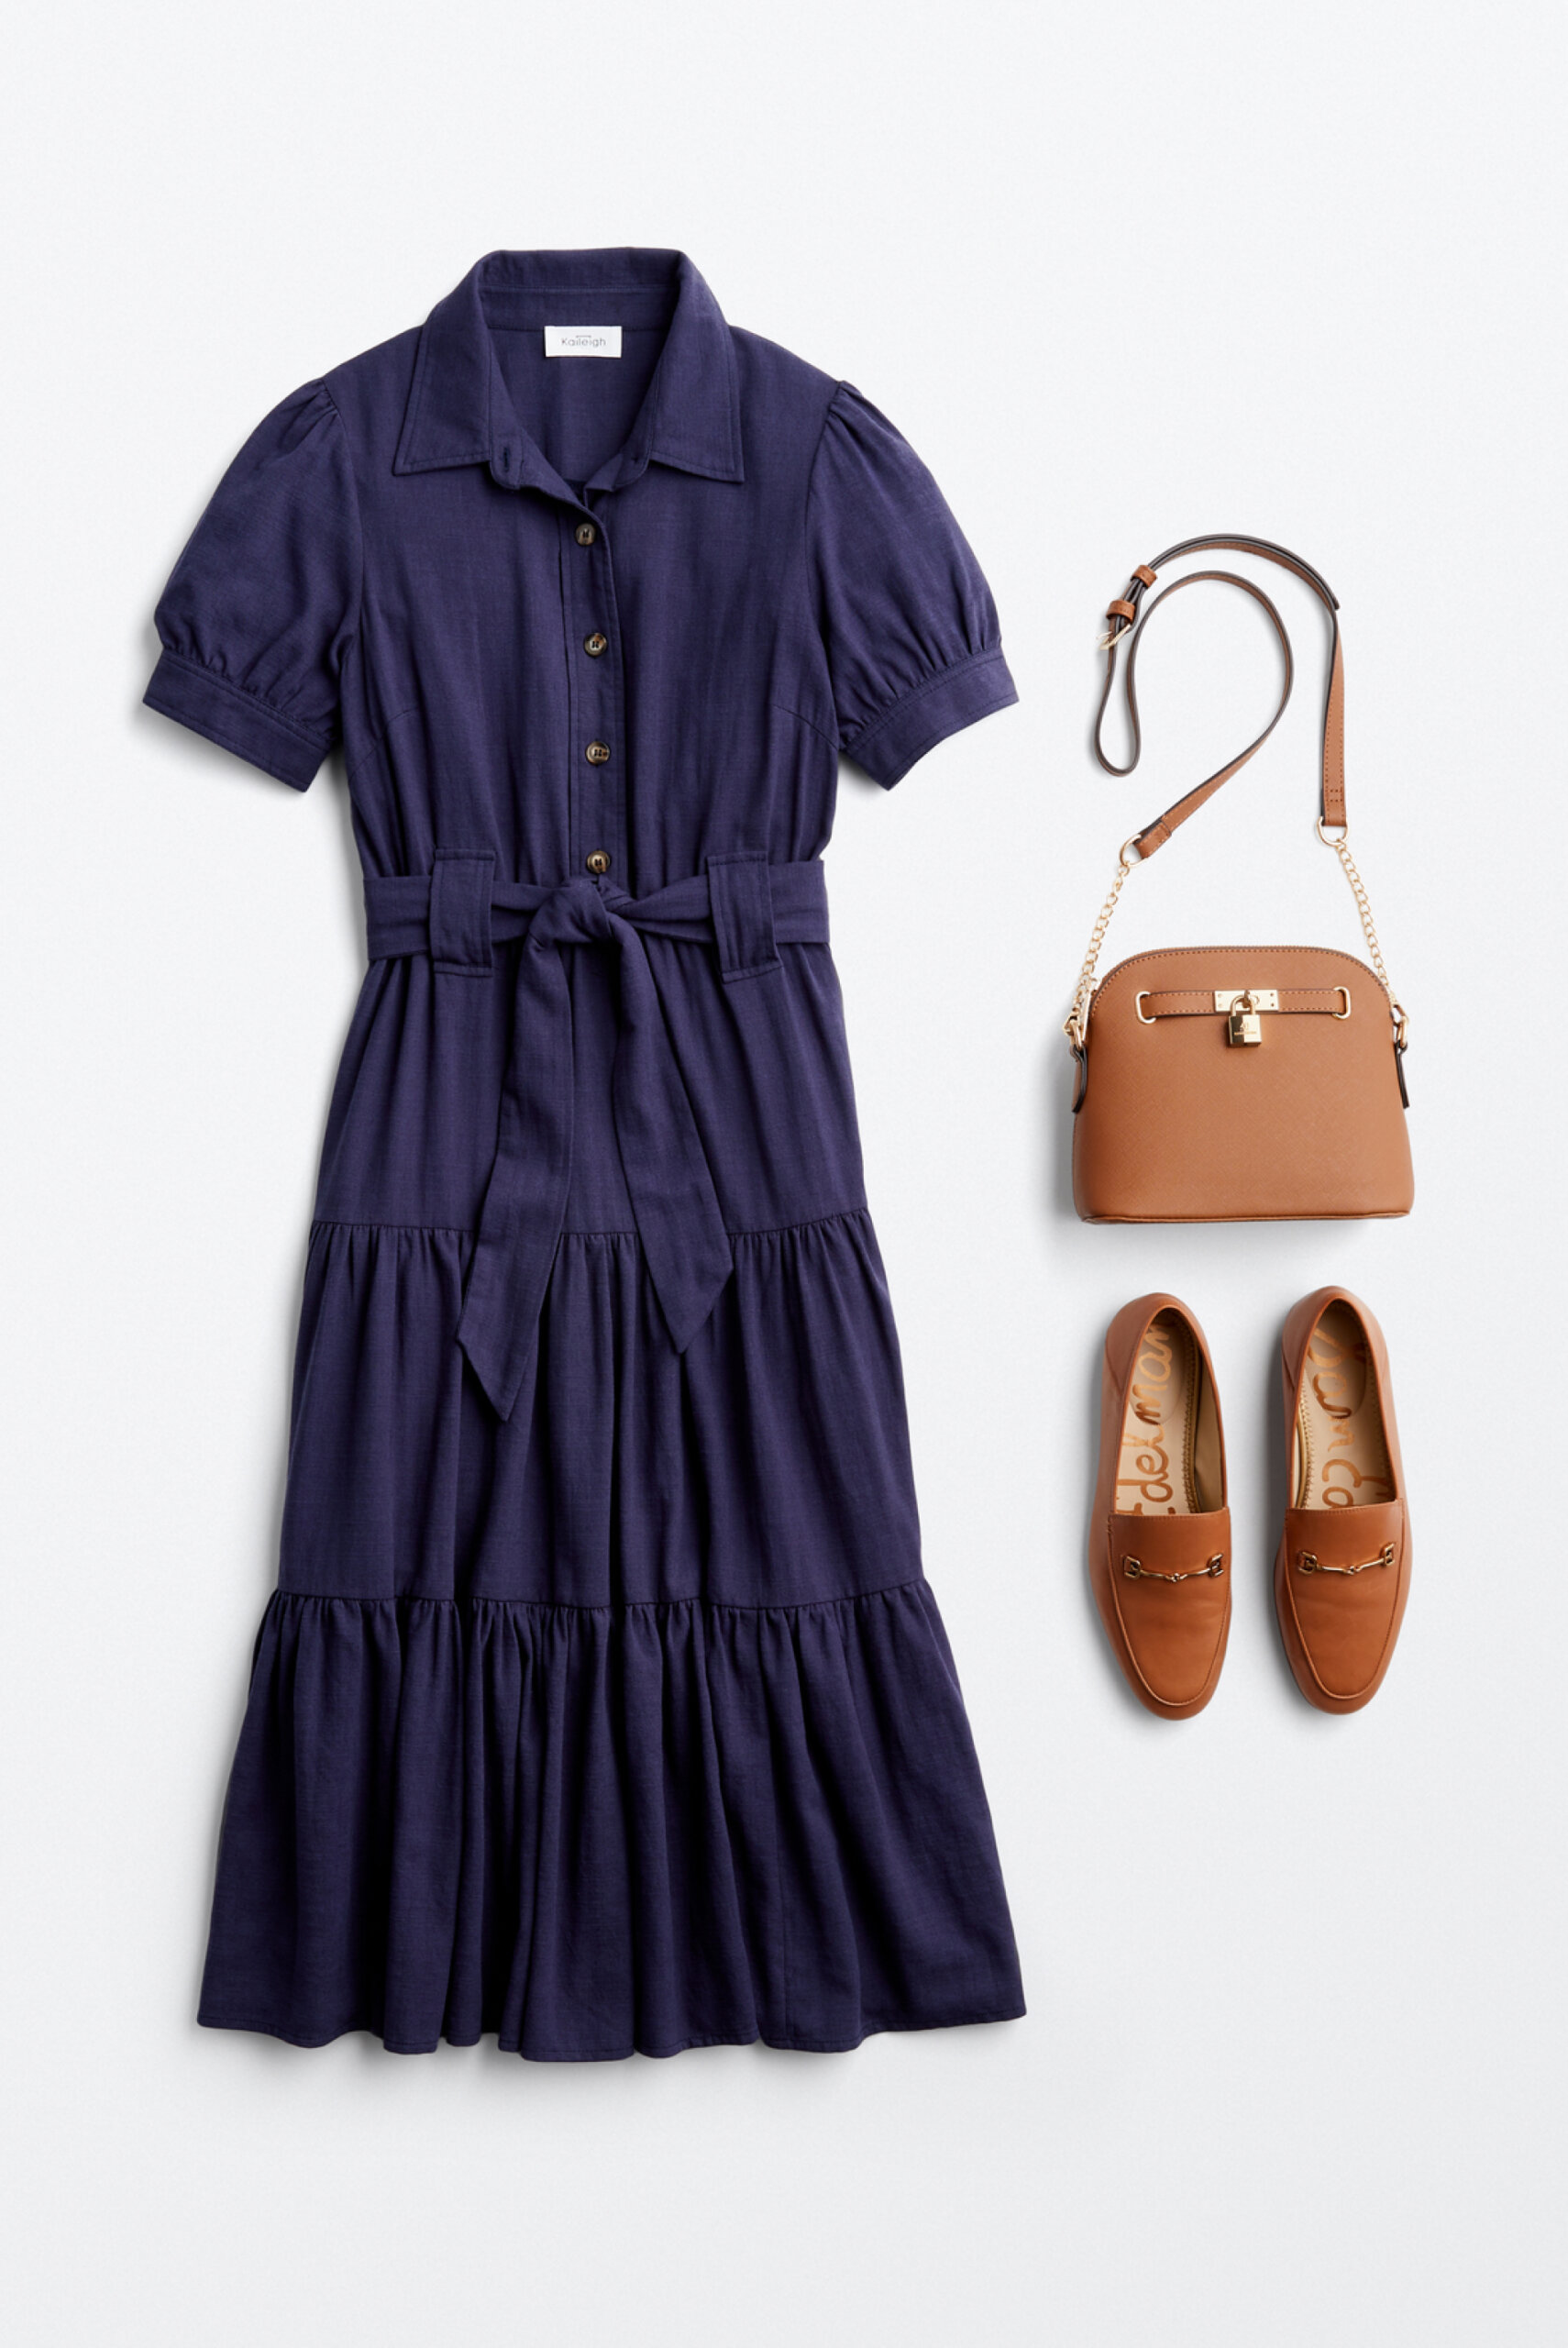 Alt text: A maxi blue polo dress with a cloth belt, a brown cross-body purse and brown flats arranged together for outfit inspiration. 